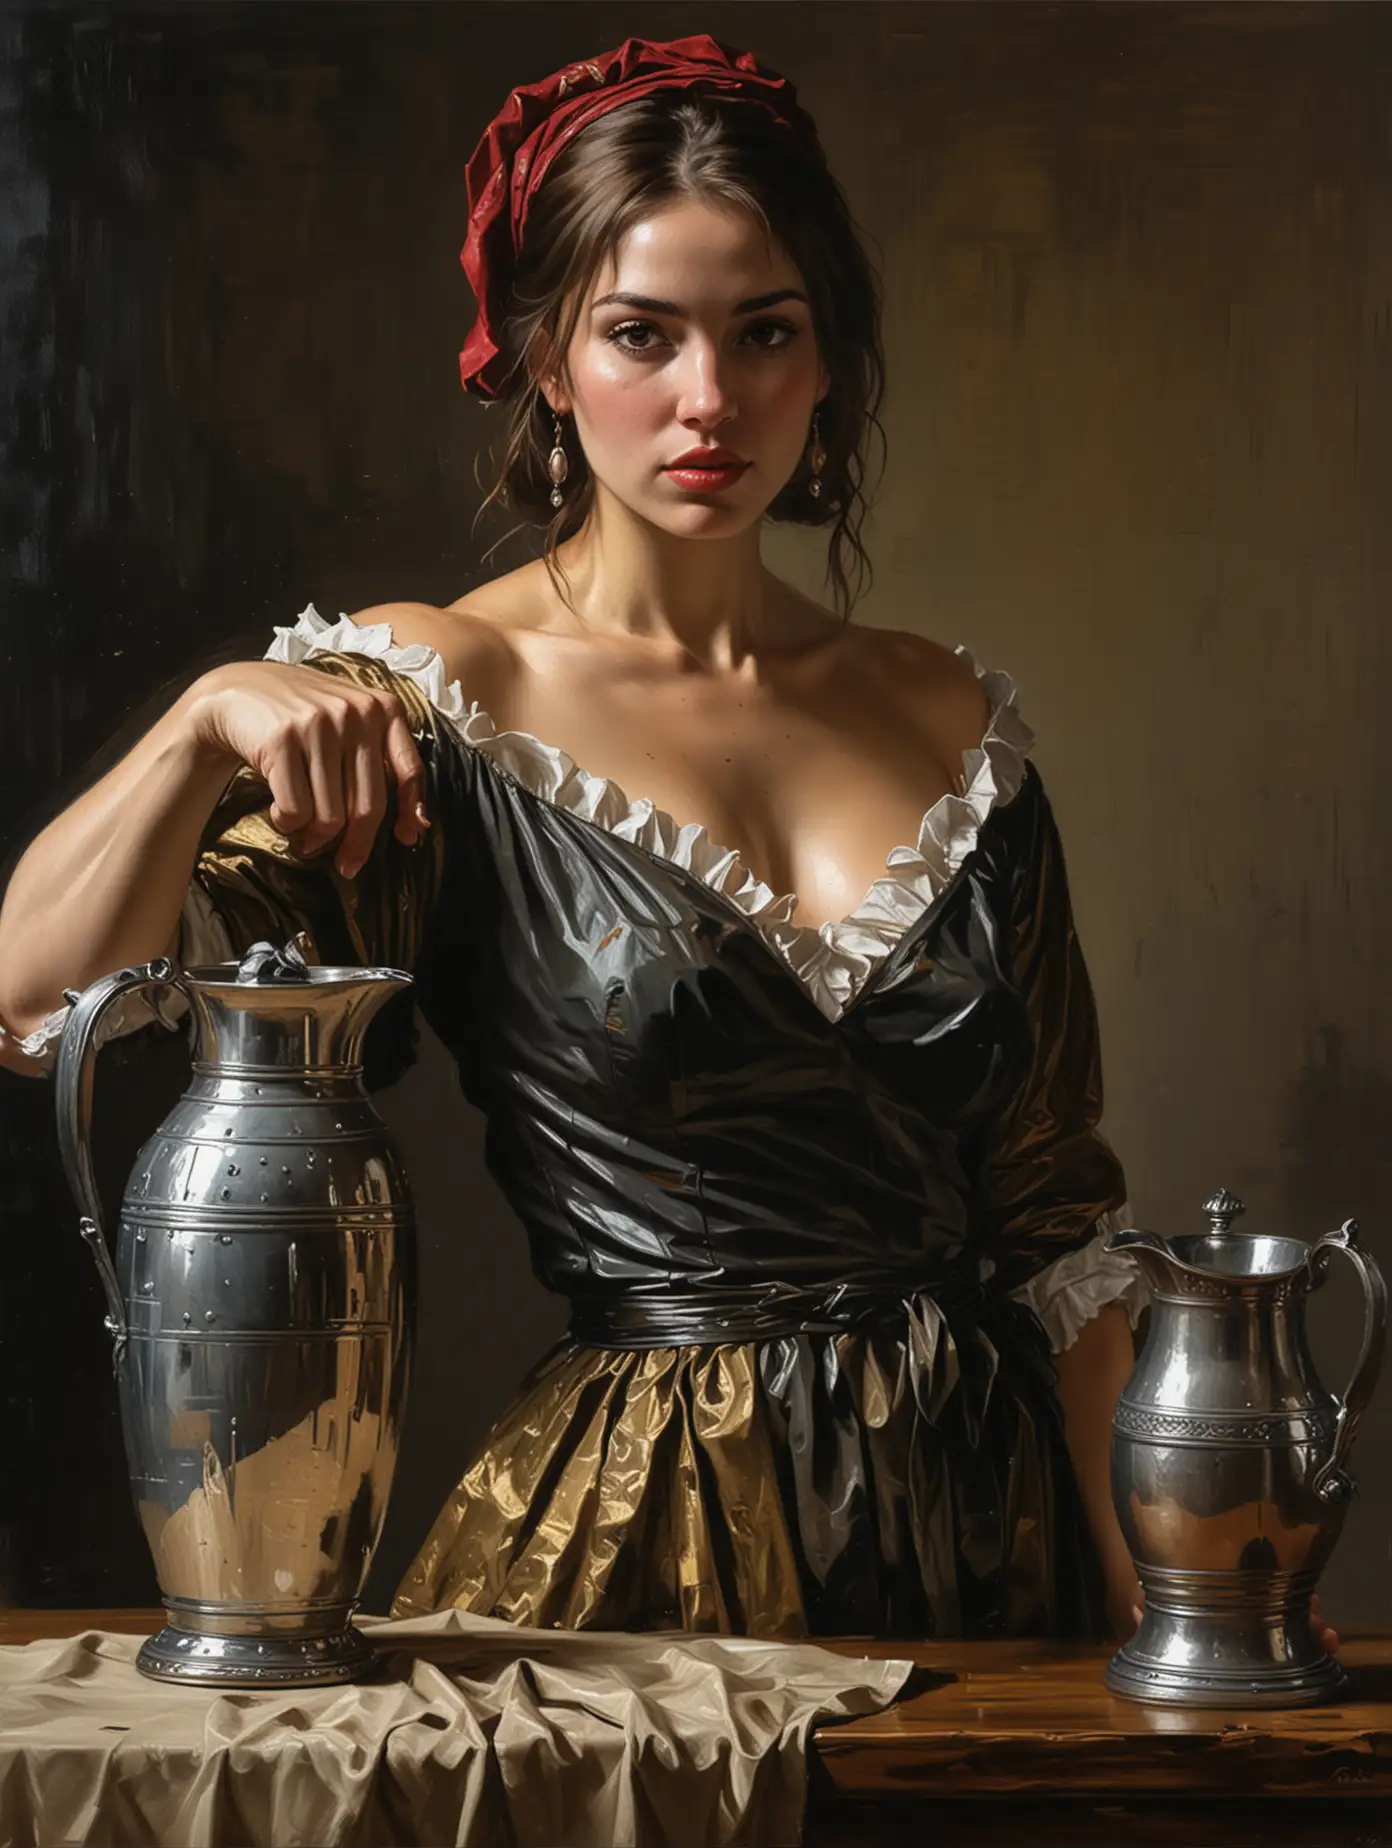 Expressive Painting of Scantily Clad Young Woman with Water Pitcher in Fabian Perez Style